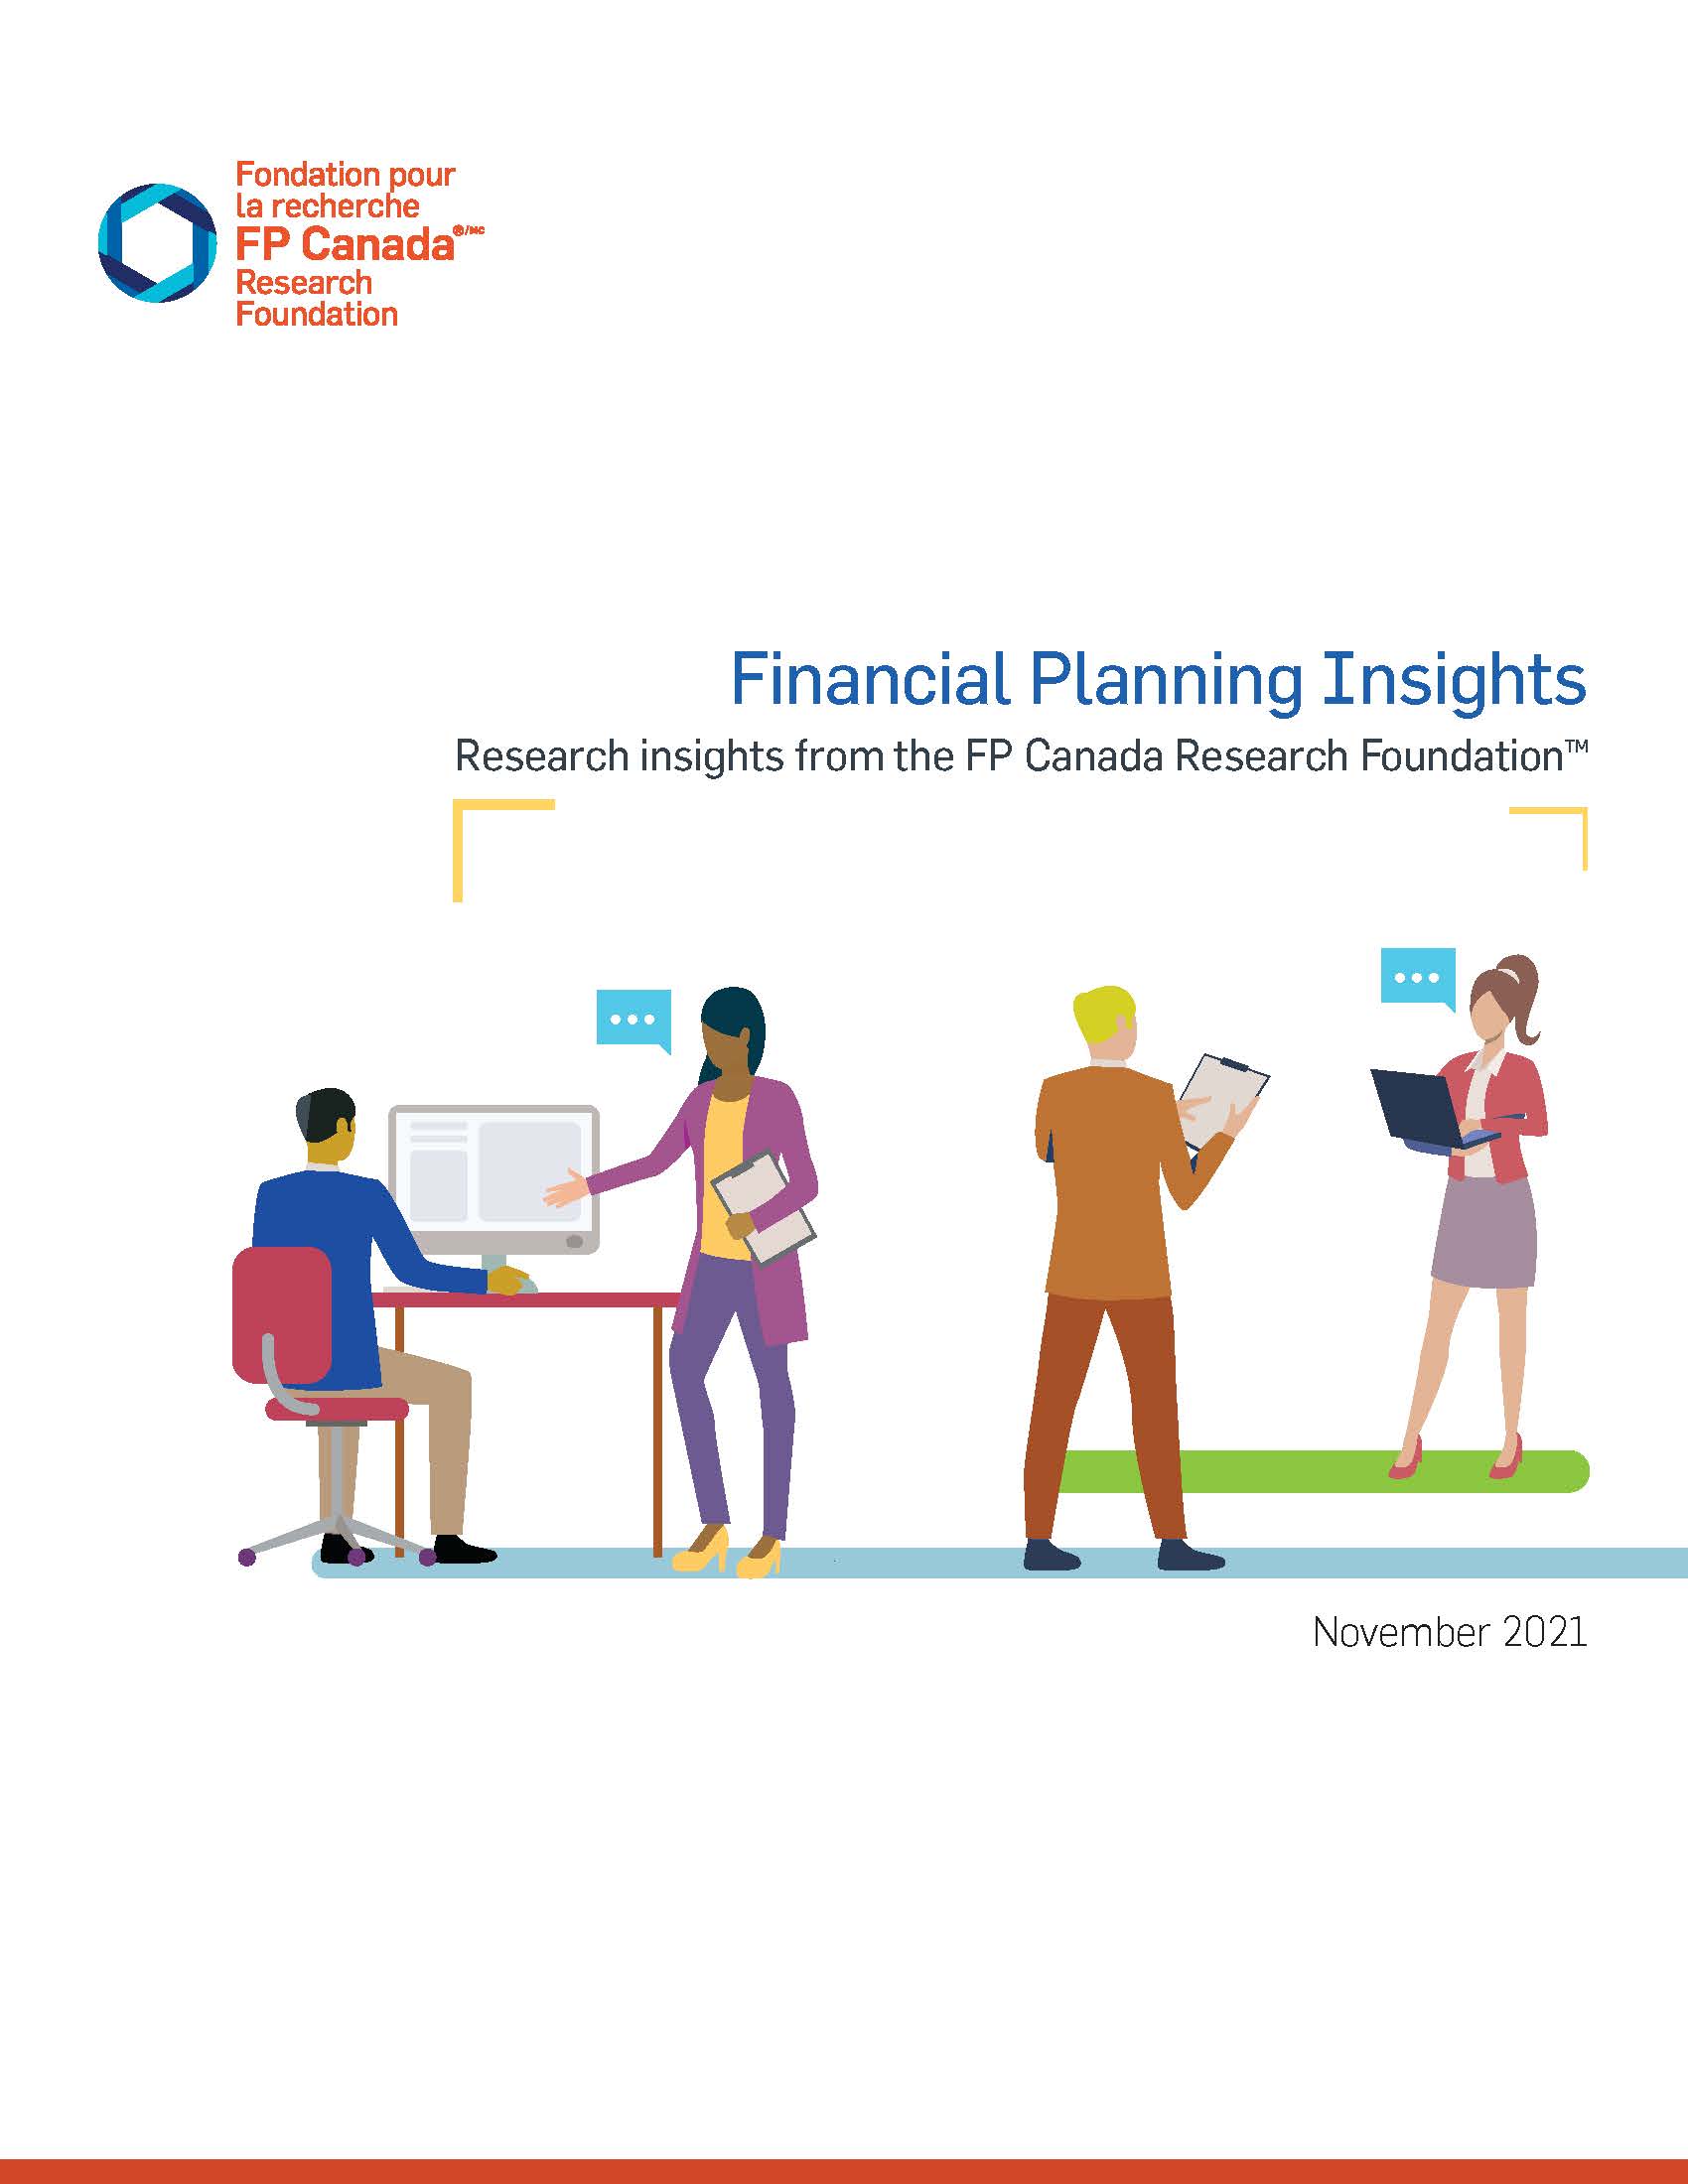 fp-canada-foundations-research-reference-book-for annual report 2021